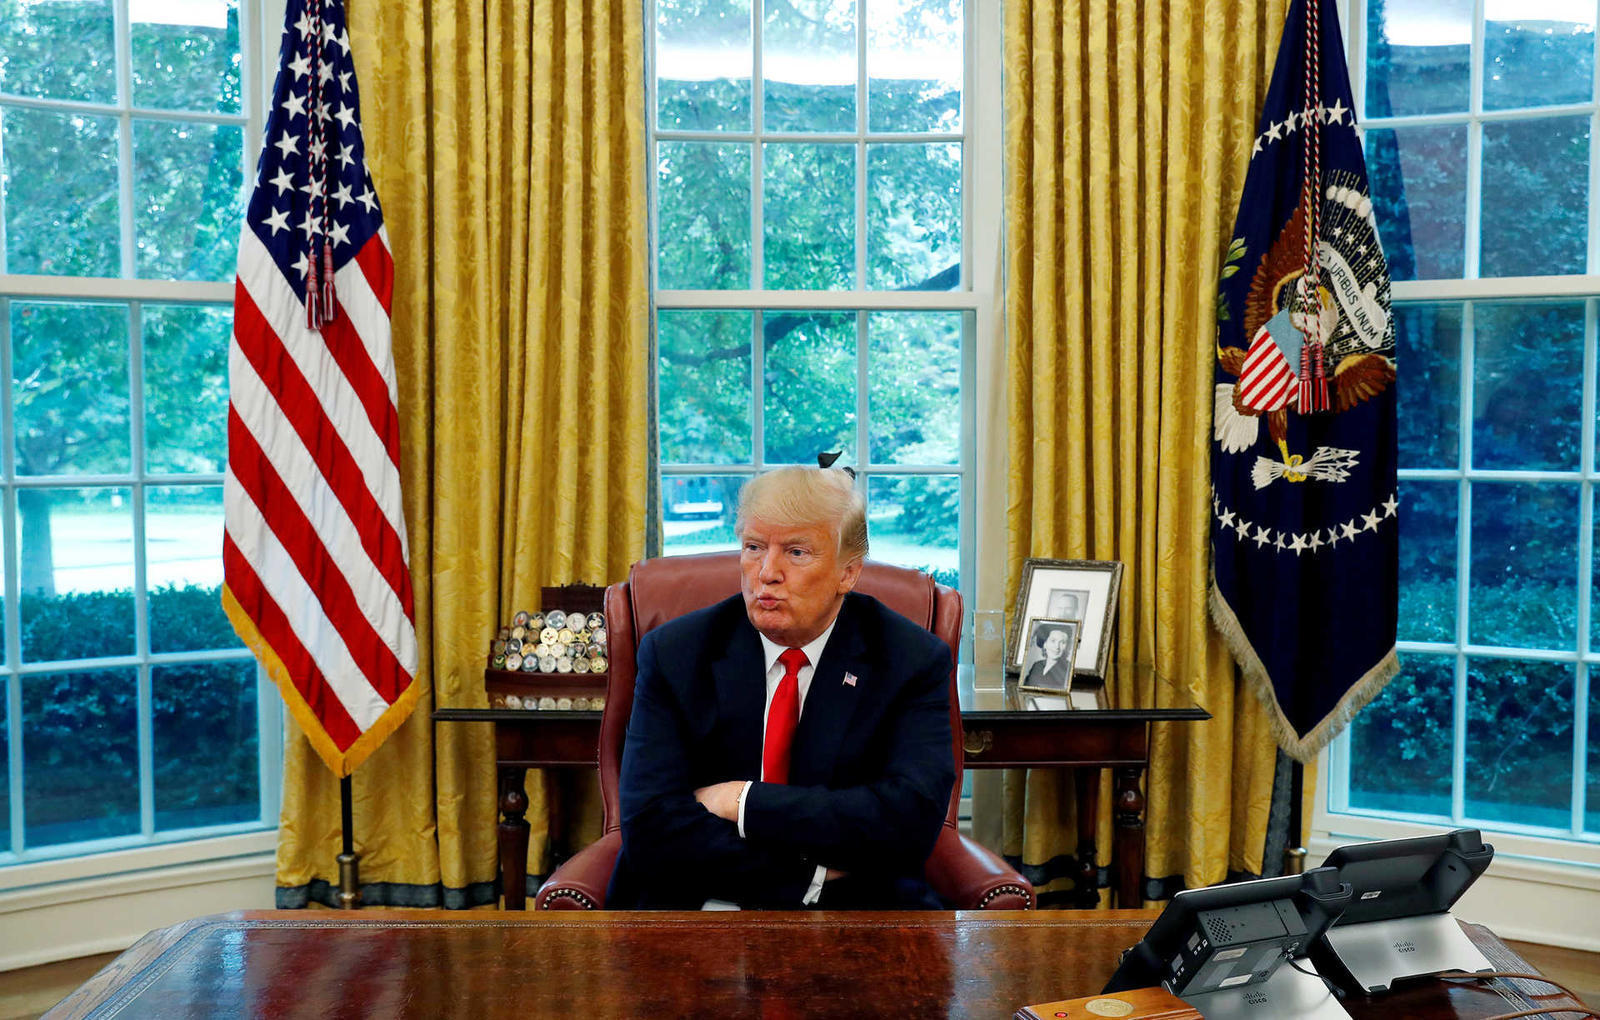 U.S. President Trump reacts to a question during interview with Reuters in the Oval Office of the White House in Washington